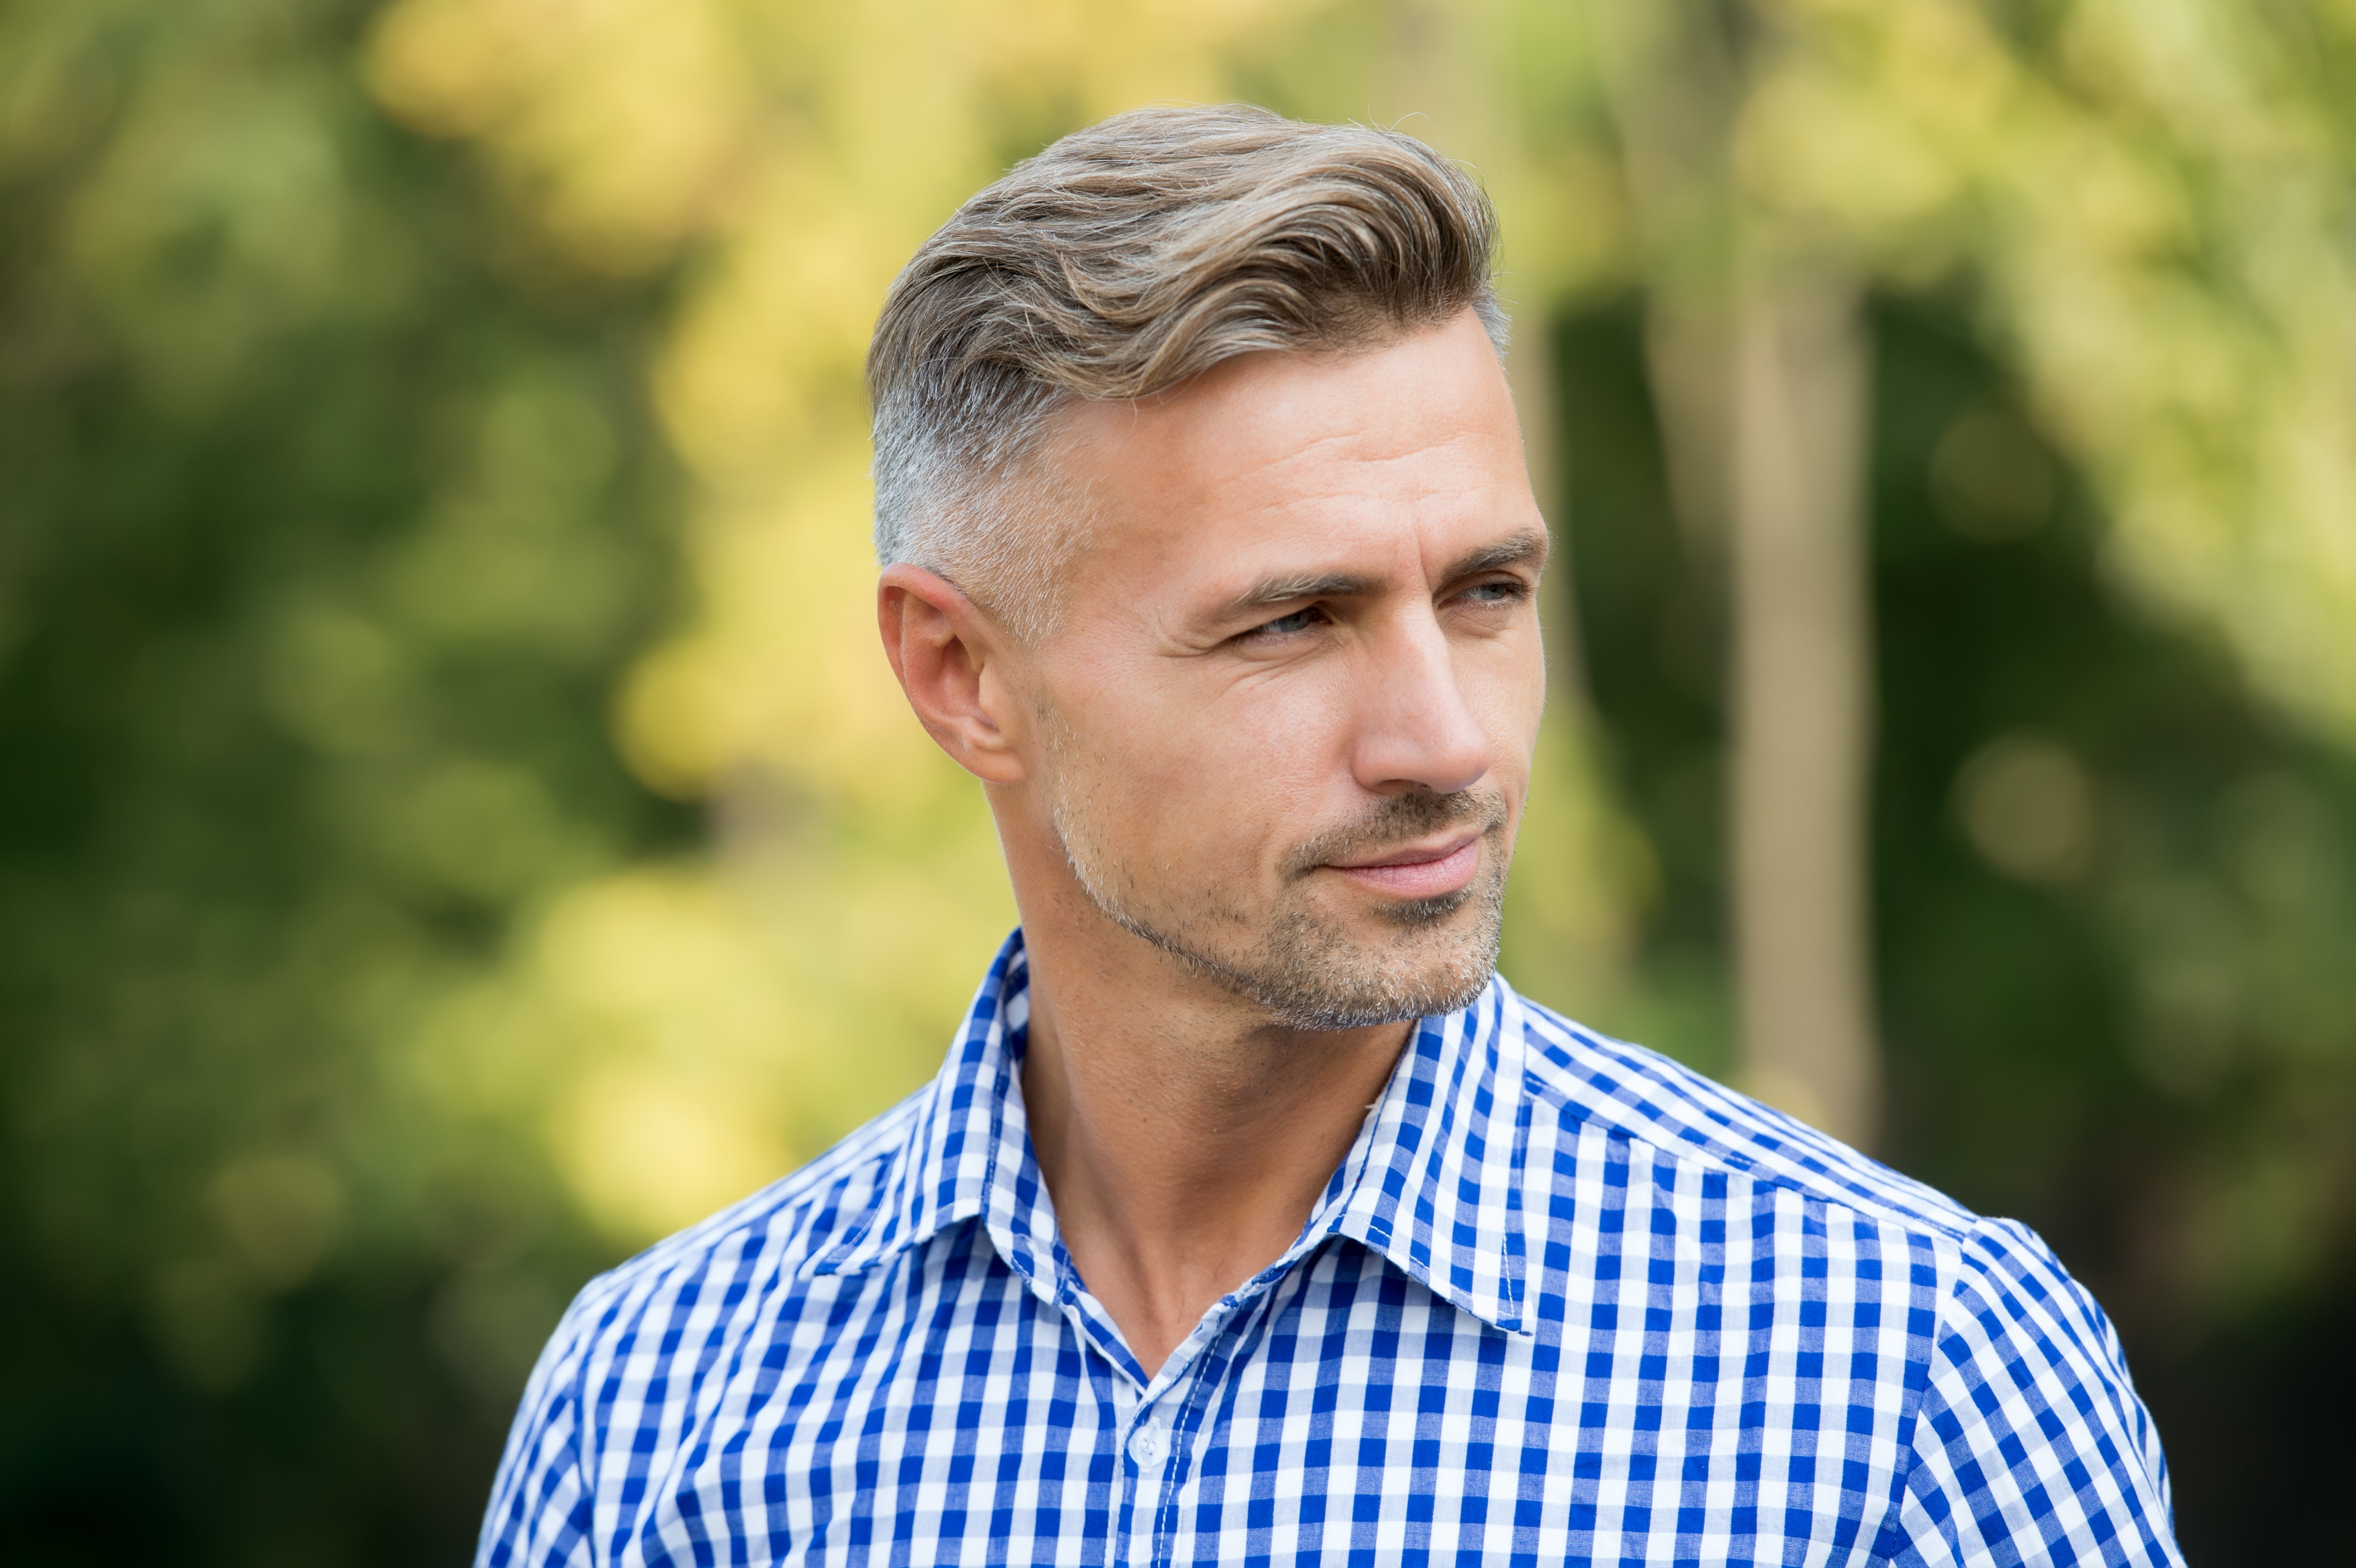 Handsome and confident. Handsome man on summer outdoor. Mature person with handsome face. Fashion and style. Grooming and style for older men. Handsome and well groomed. (Foto: Getty Images/iStockphoto)